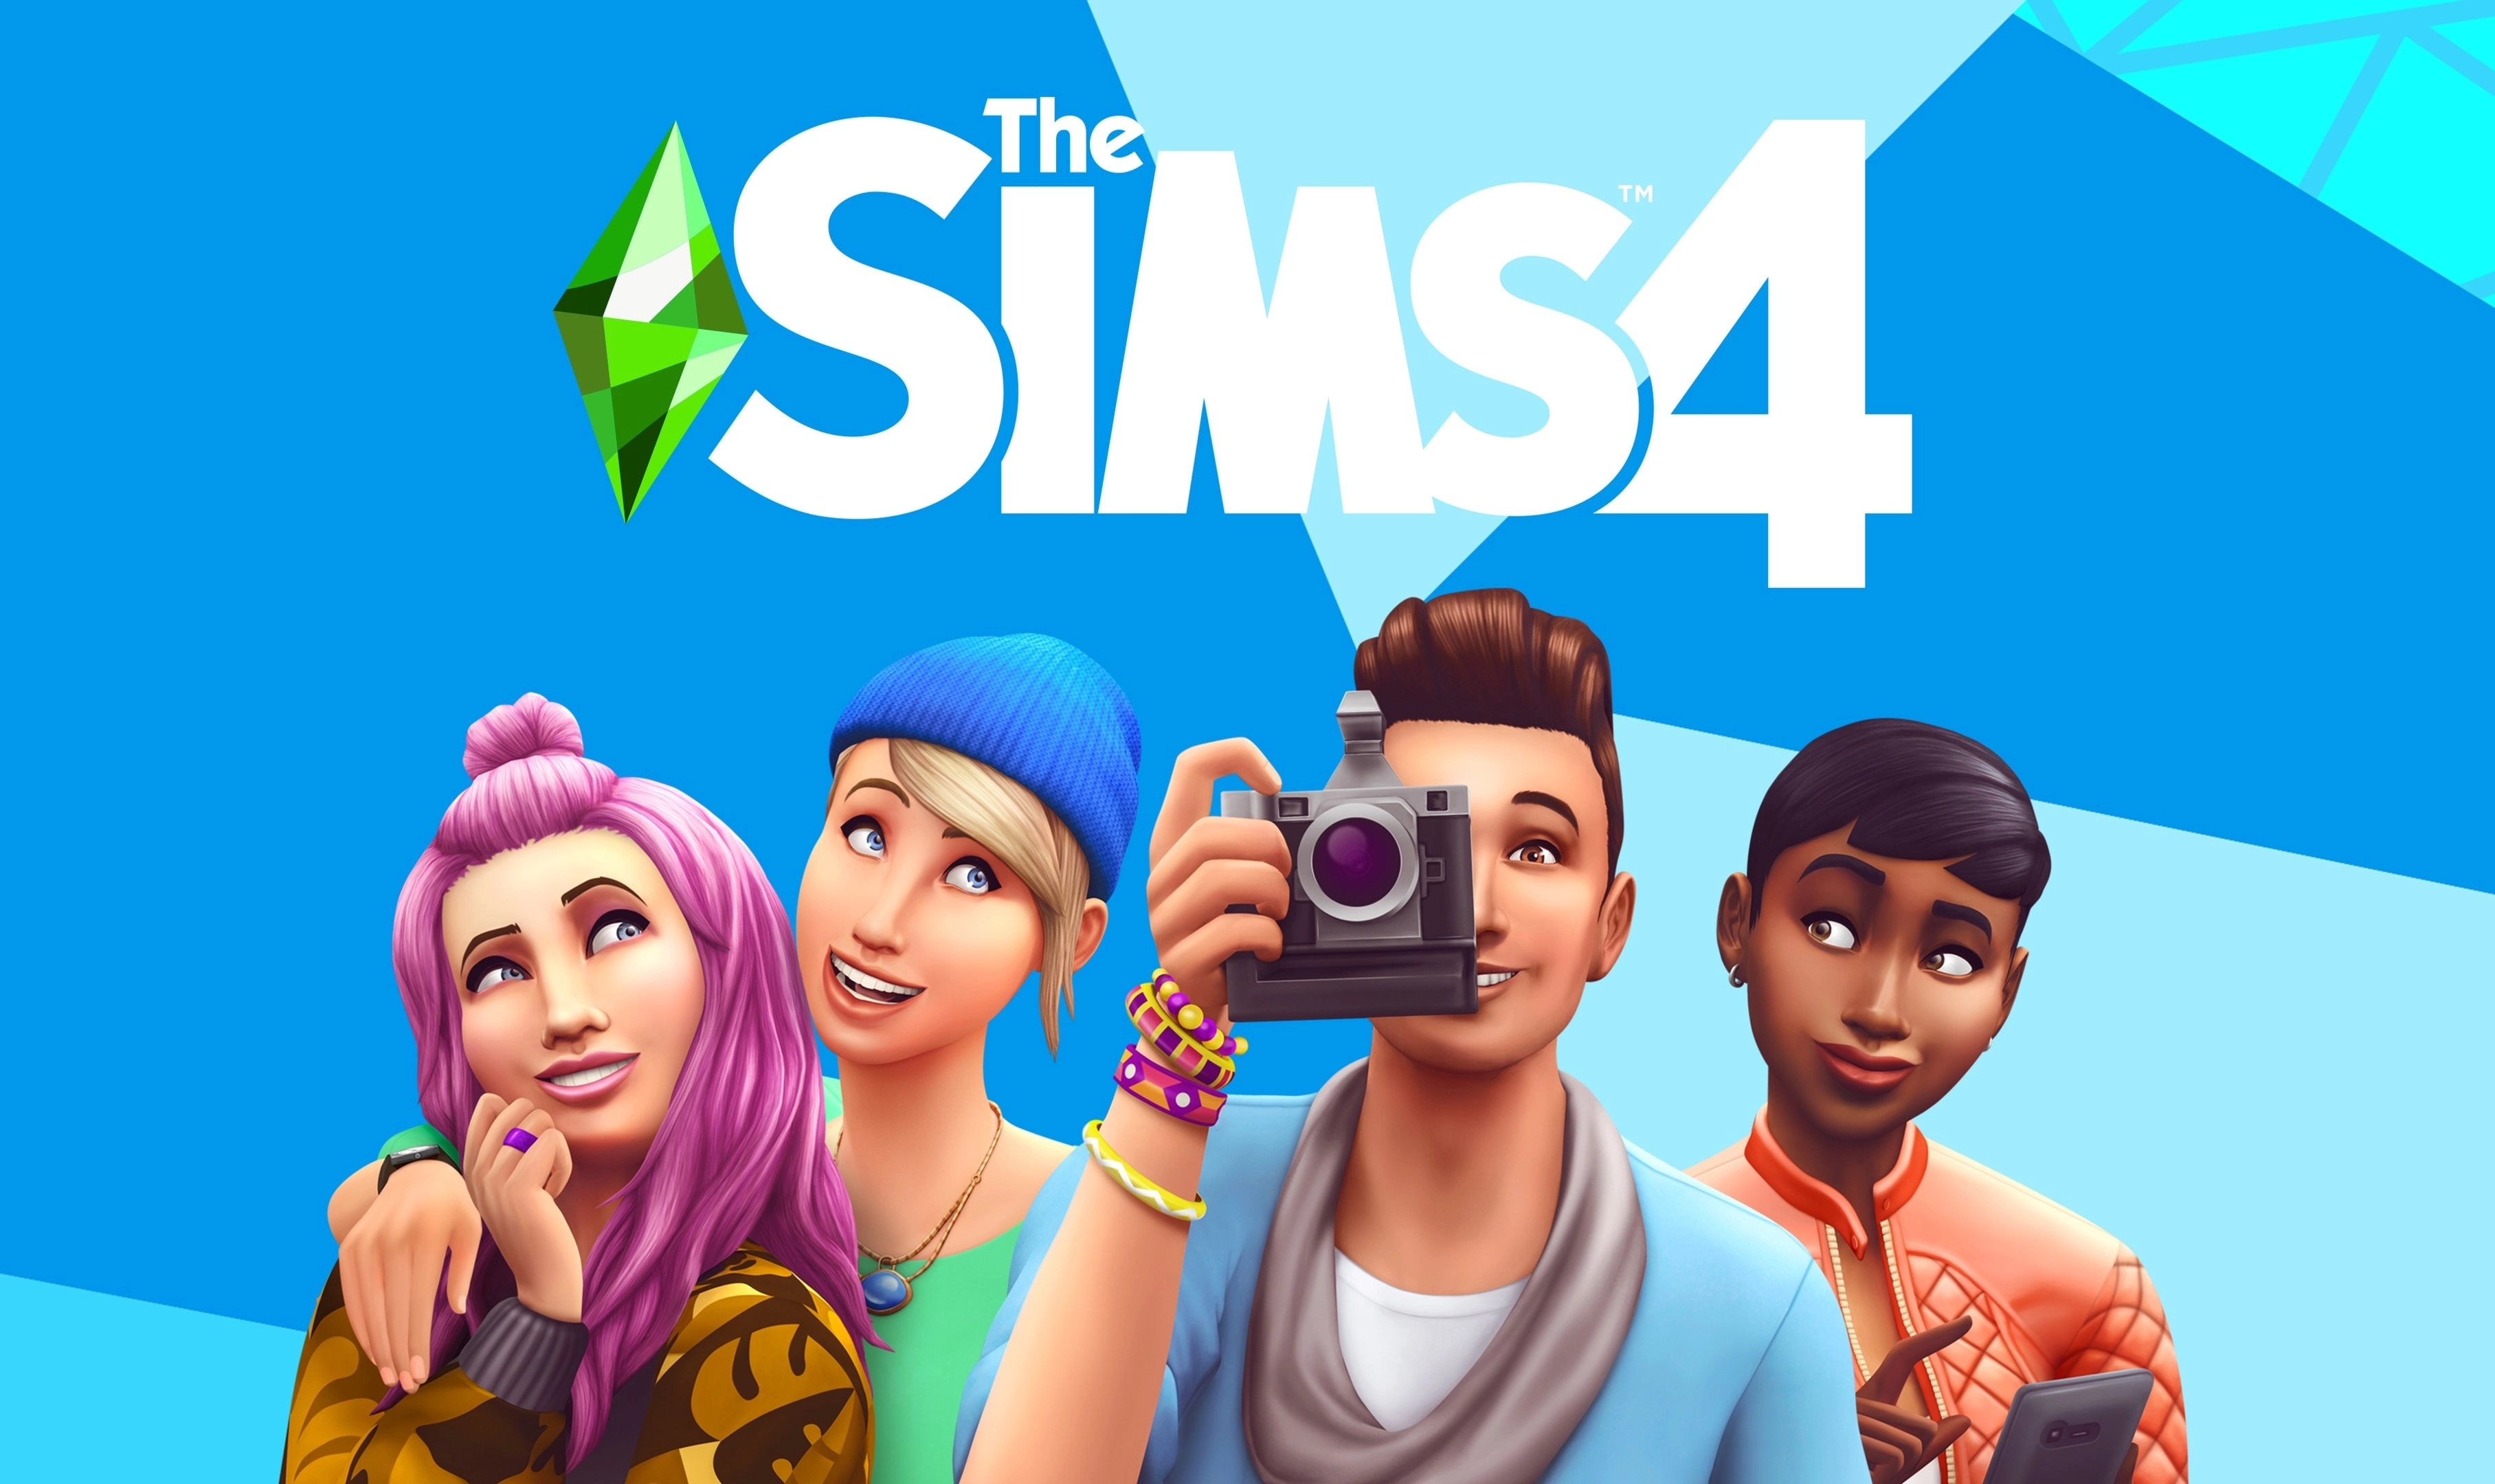 All The Sims 4 cheats